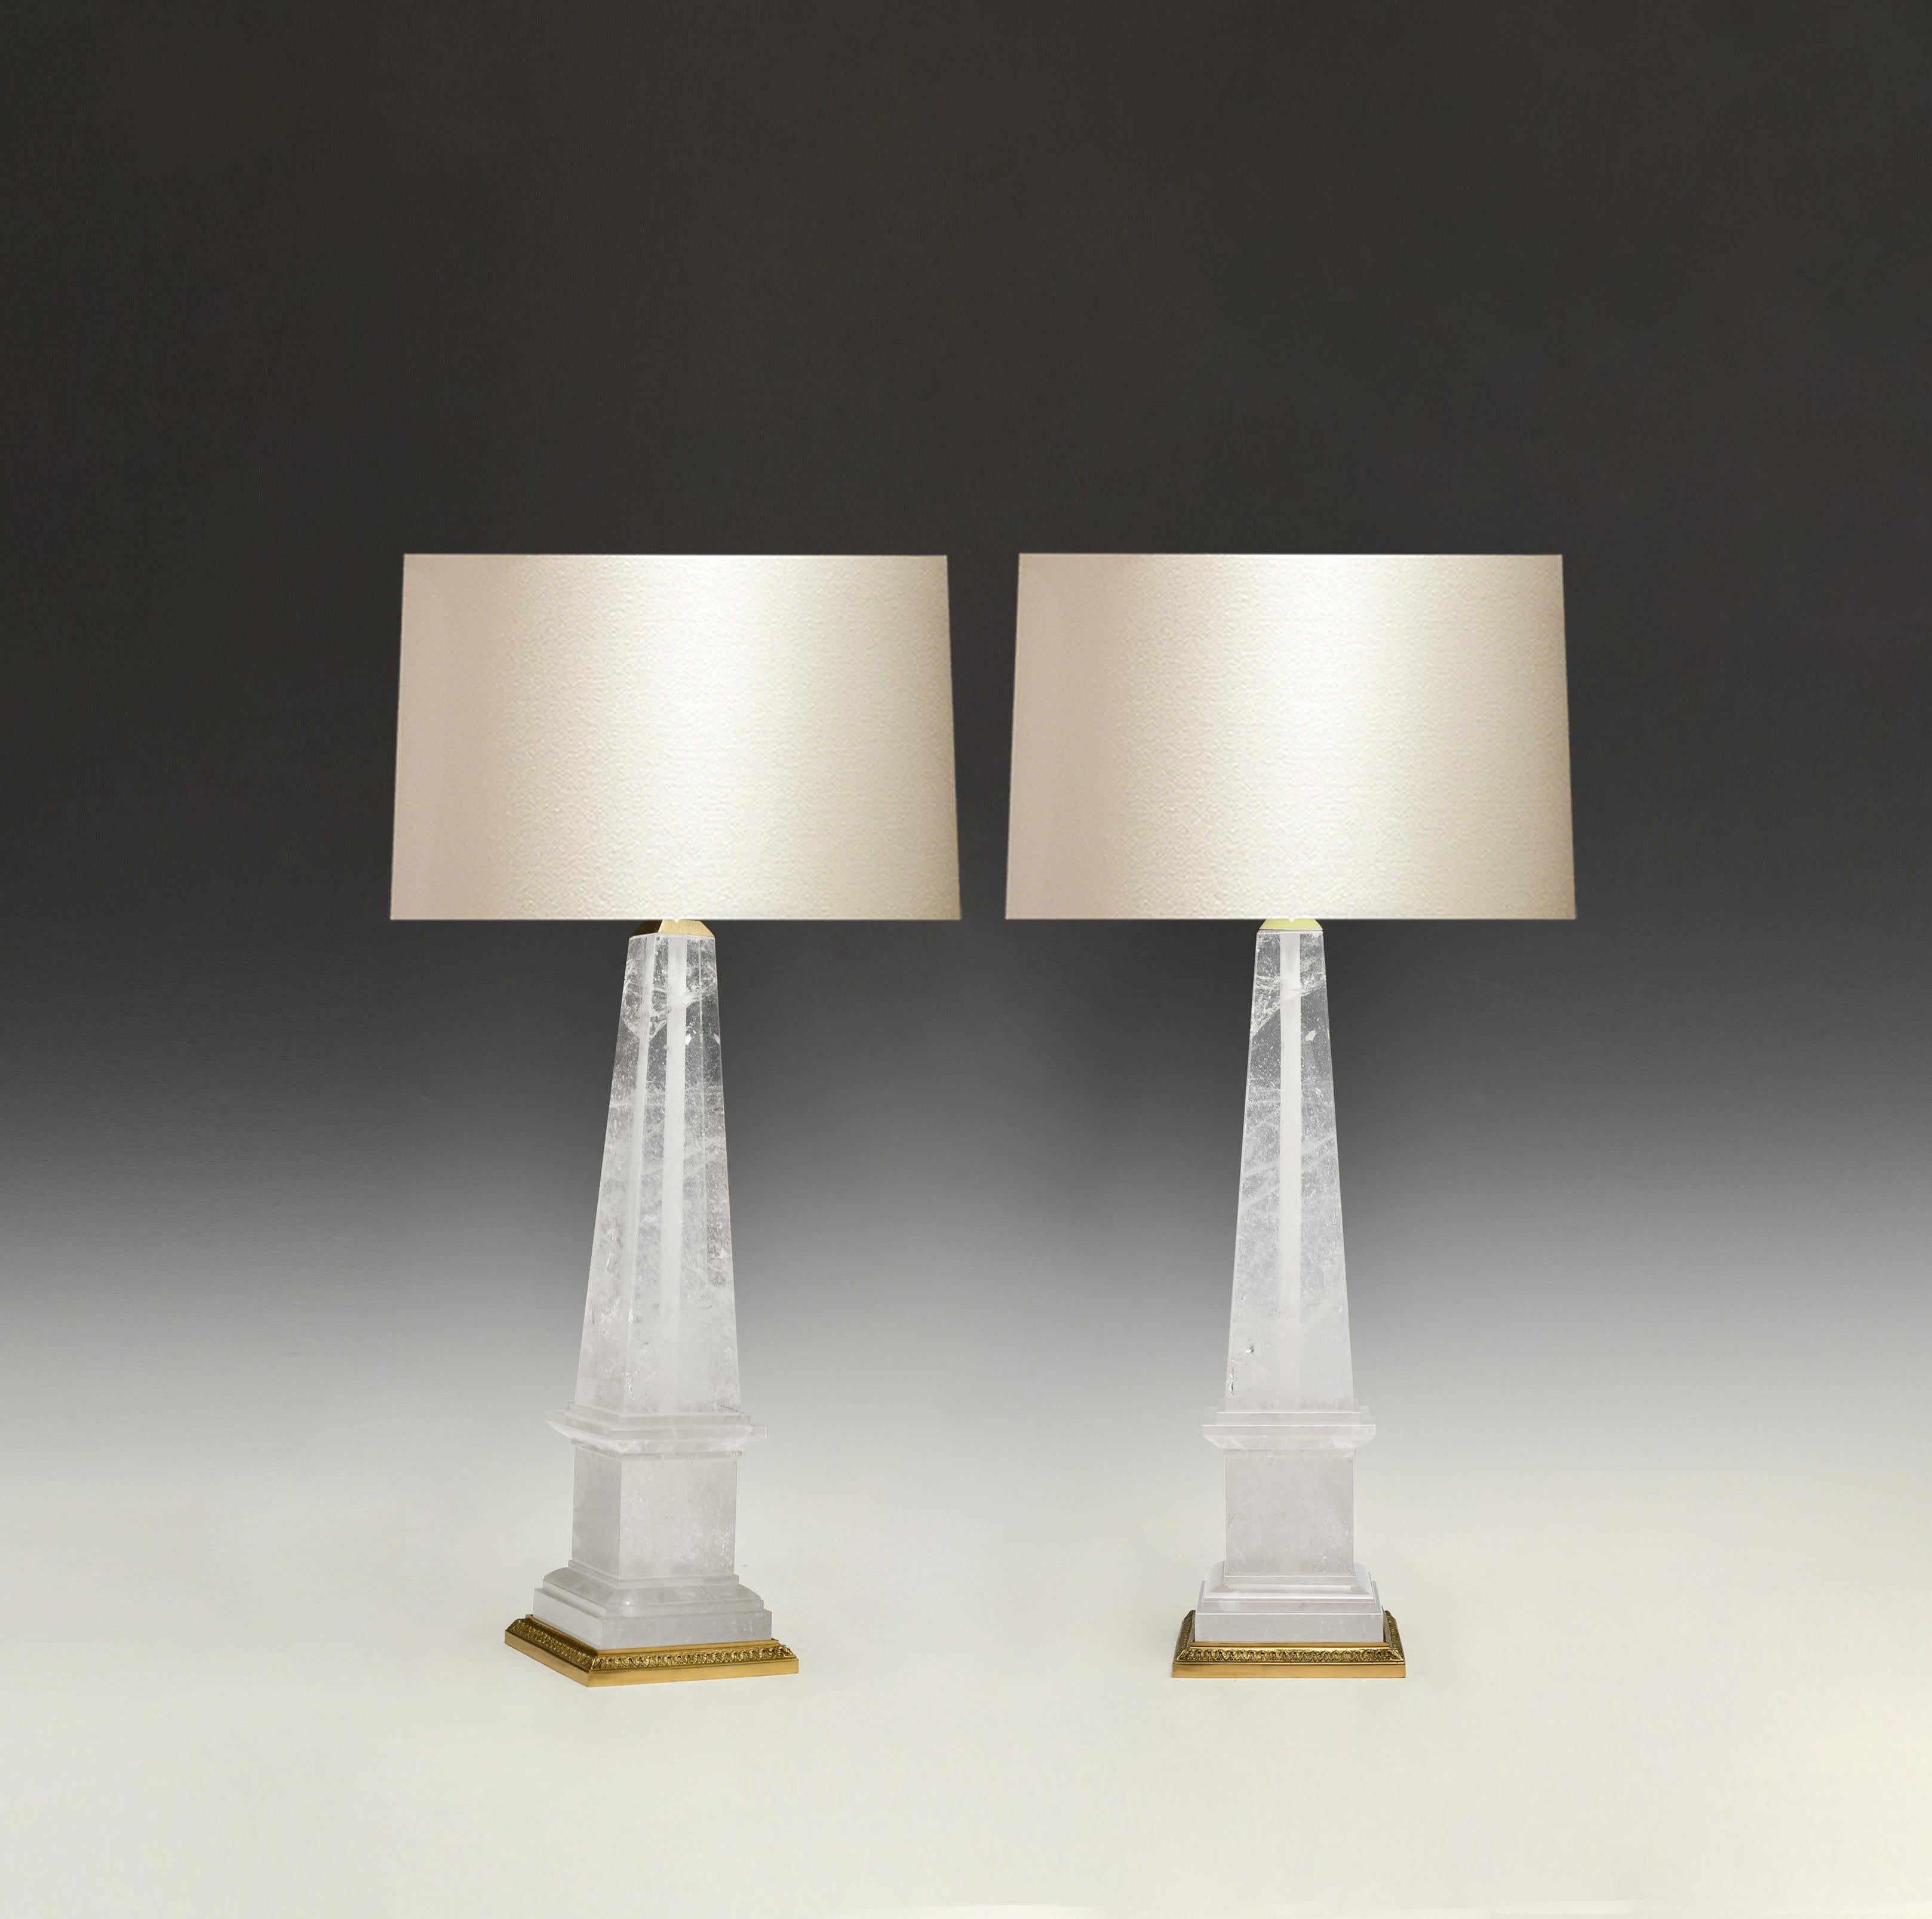 Group of four obelisk rock crystal lamps with fine castled polish brass bases. Created by Phoenix Gallery.
Each lamp installs two sockets.
To the top of the rock crystal: 17